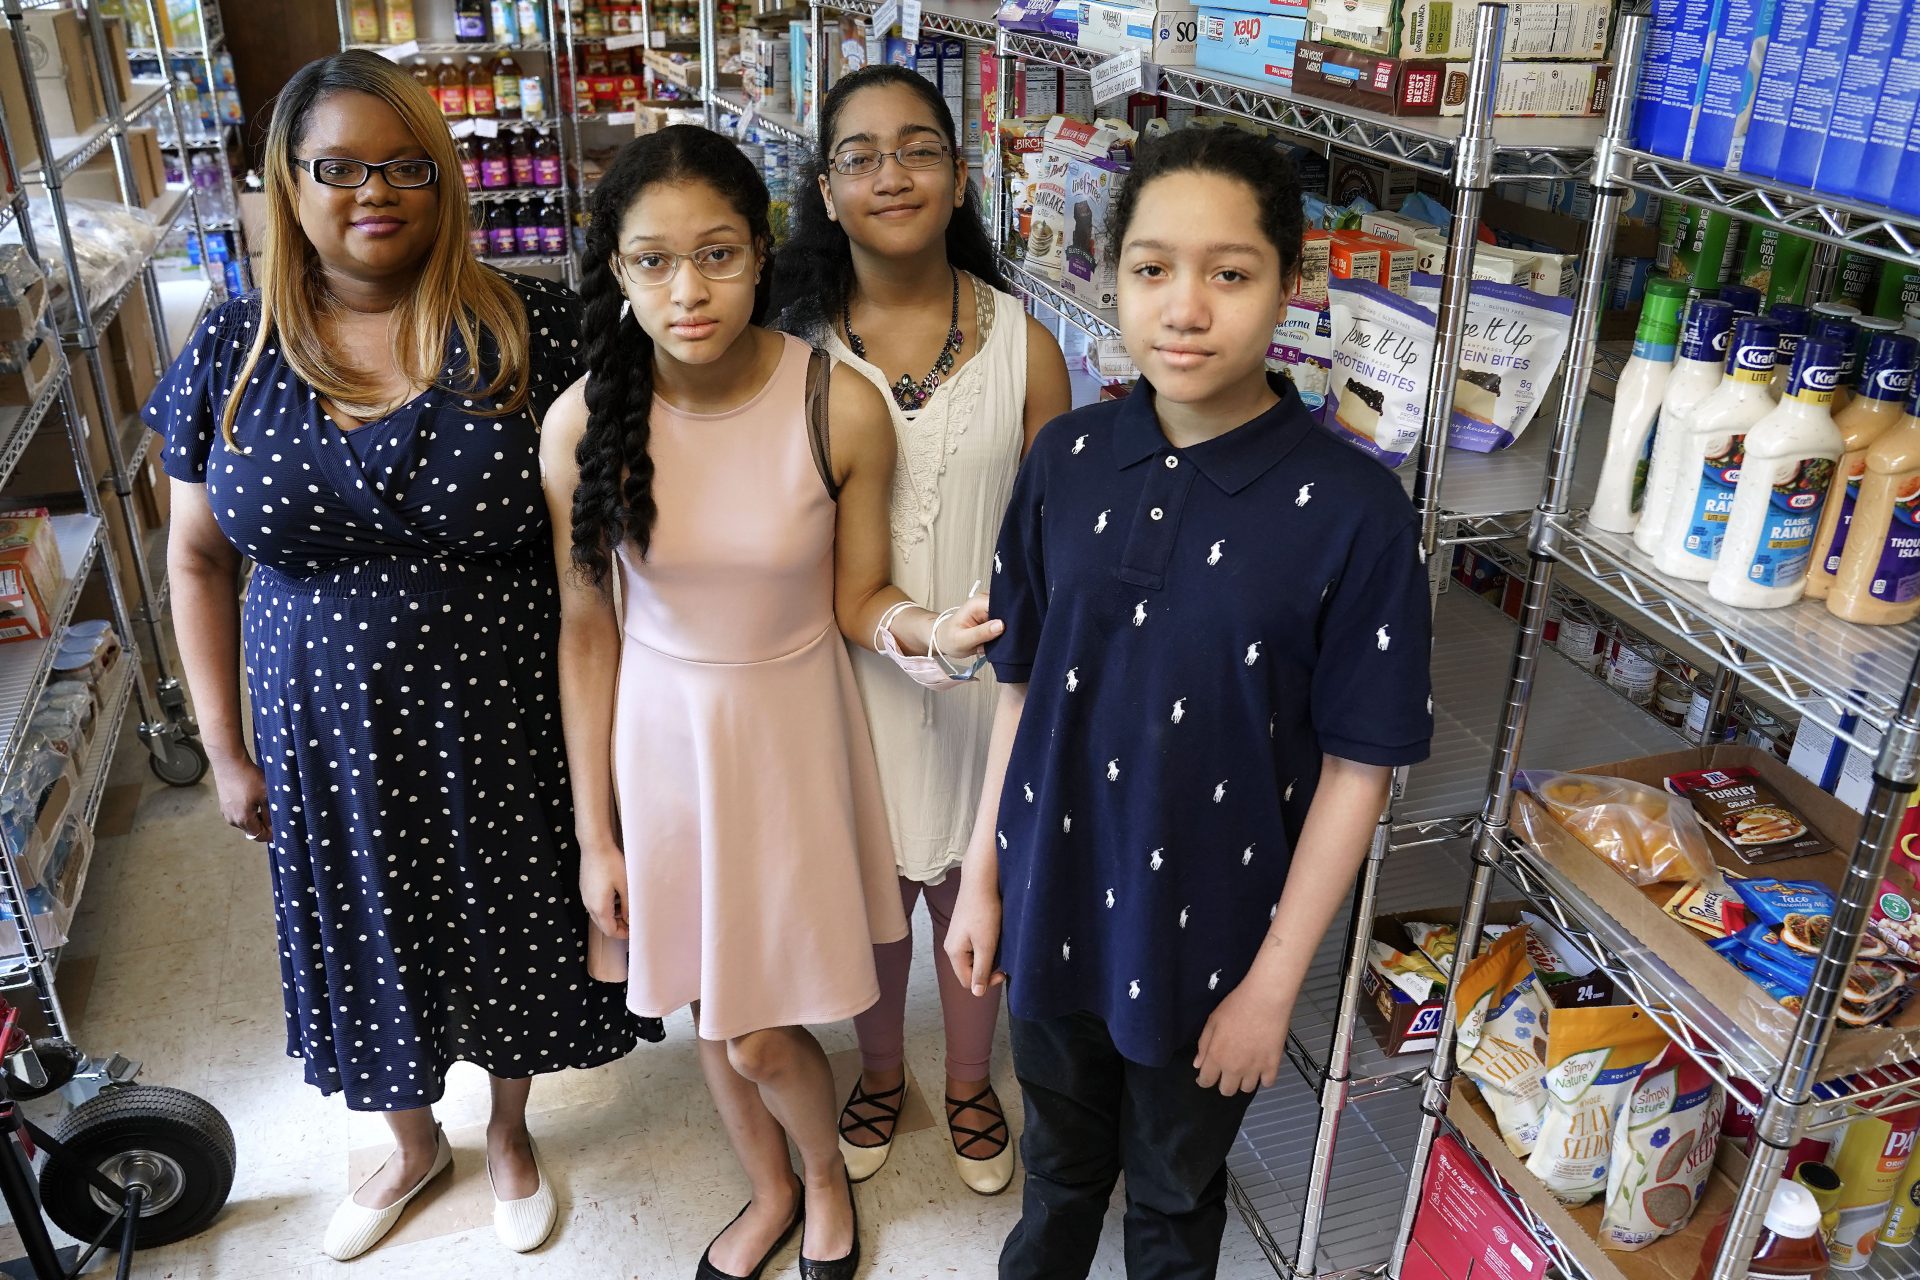 Aja Purnell-Mitchell, left, stands with her three children, Kyla, 13; Kyra, 15, and Cartier, 14, right, at a local food hub in Durham, N.C., on Friday, May 28, 2021, where they often help their mother. The teenagers have been learning remotely since last March but now plan to attend summer school after being vaccinated.